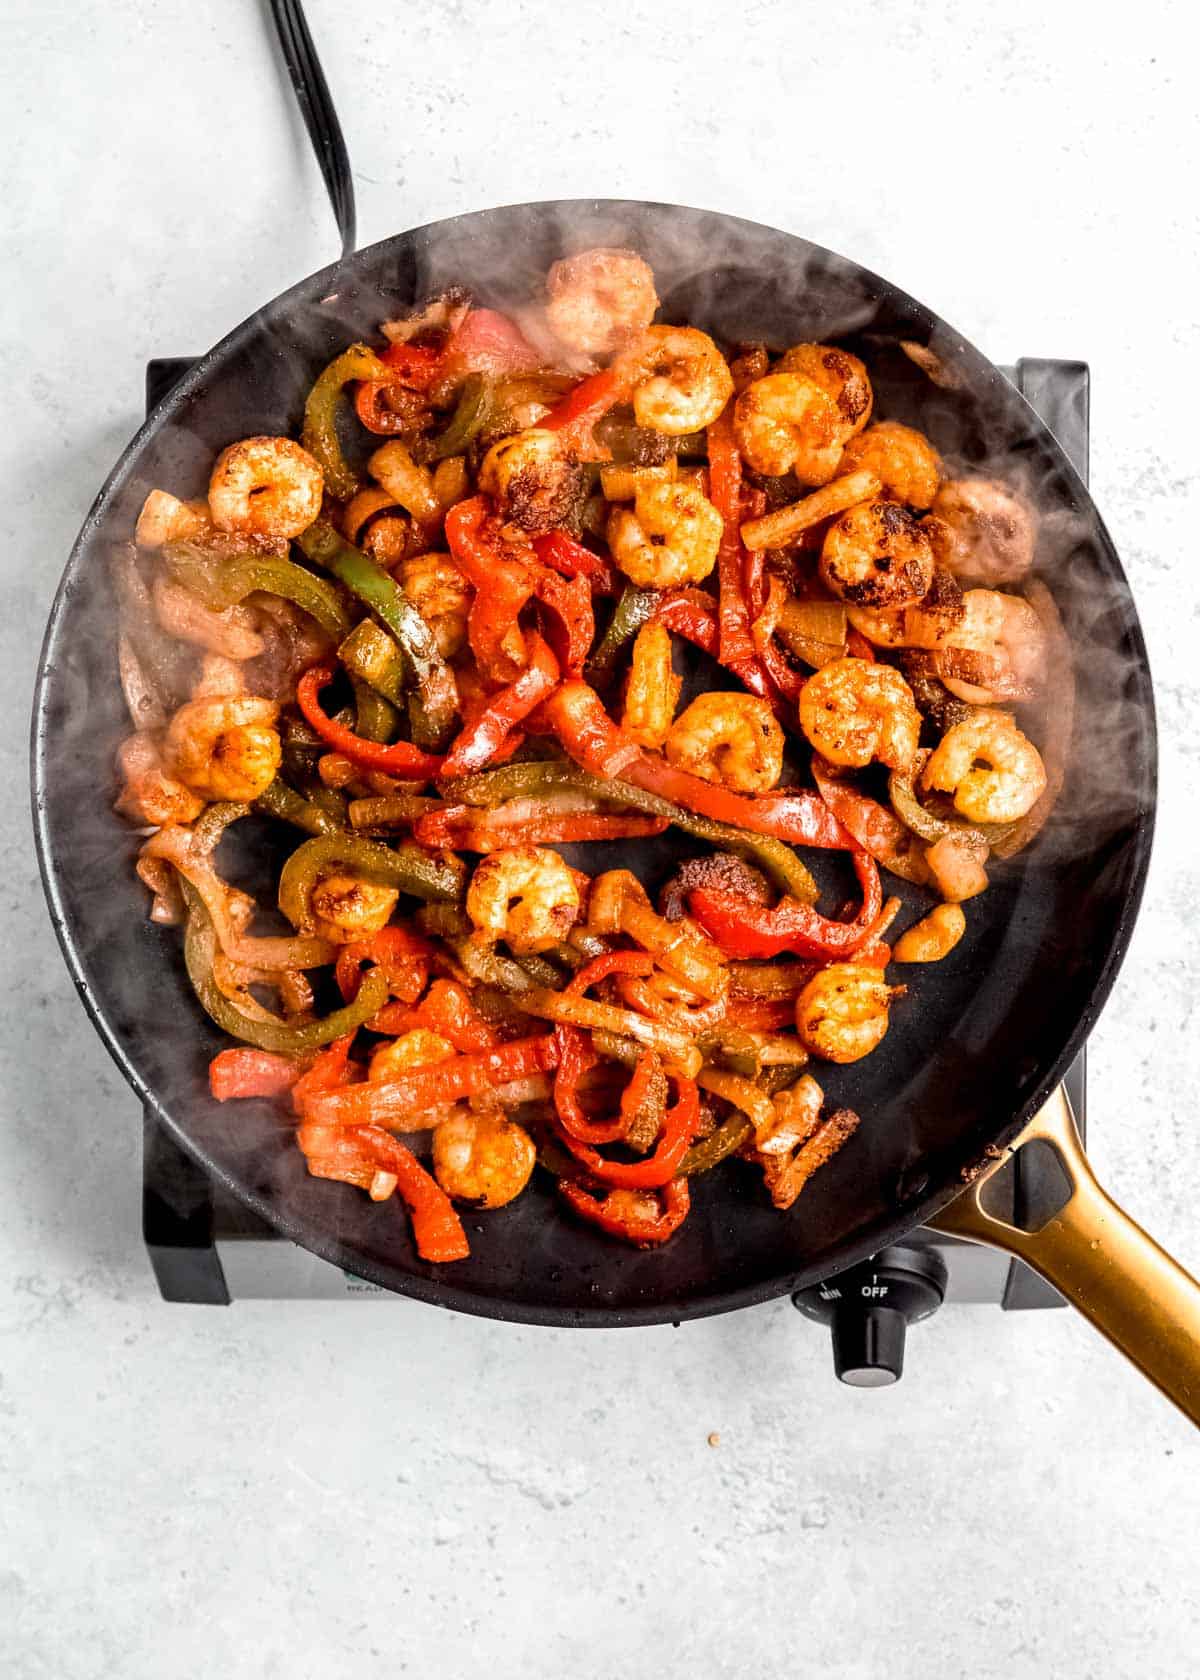 shrimp, peppers, and onions being cooked in black skillet